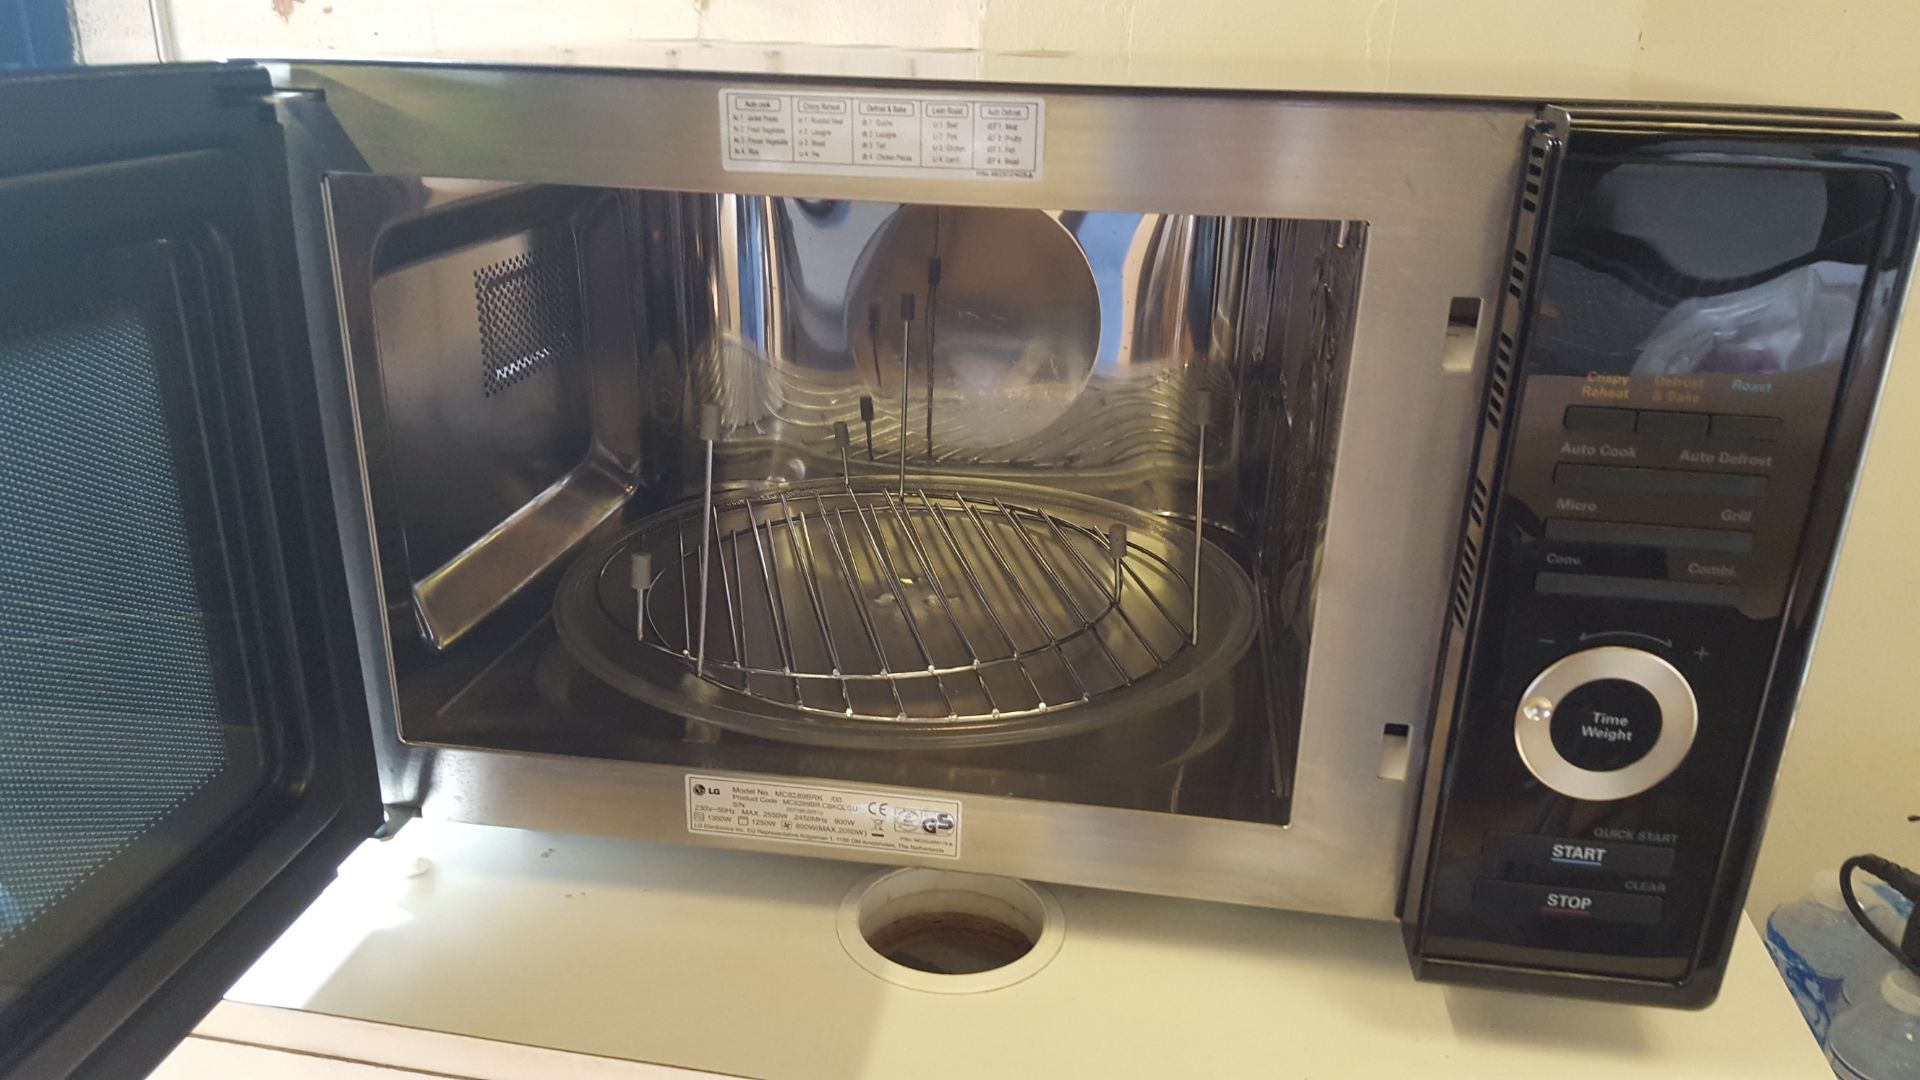 LG MC8289BRK Microwave Oven with Grill and Convection 28L - Image 3 of 5